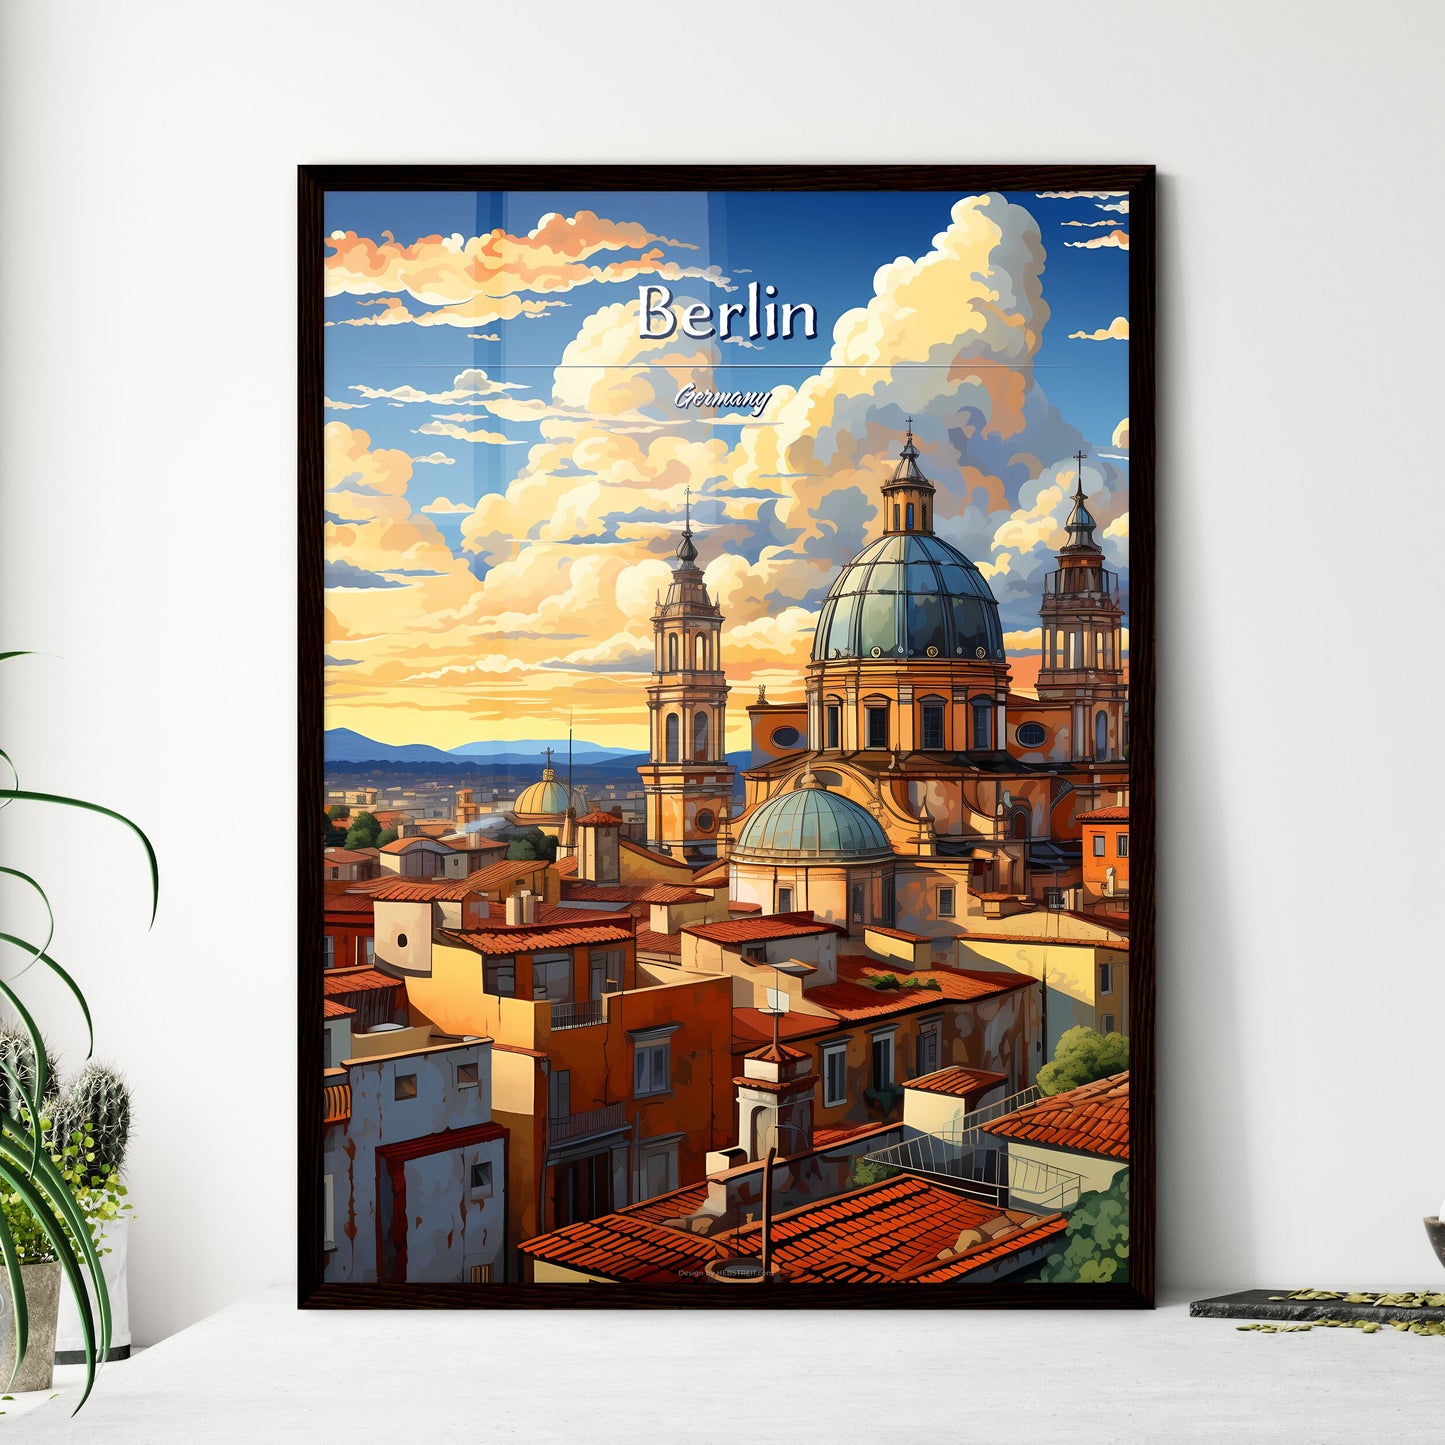 On the roofs of Berlin, Germany - Art print of a city with a dome and towers Default Title